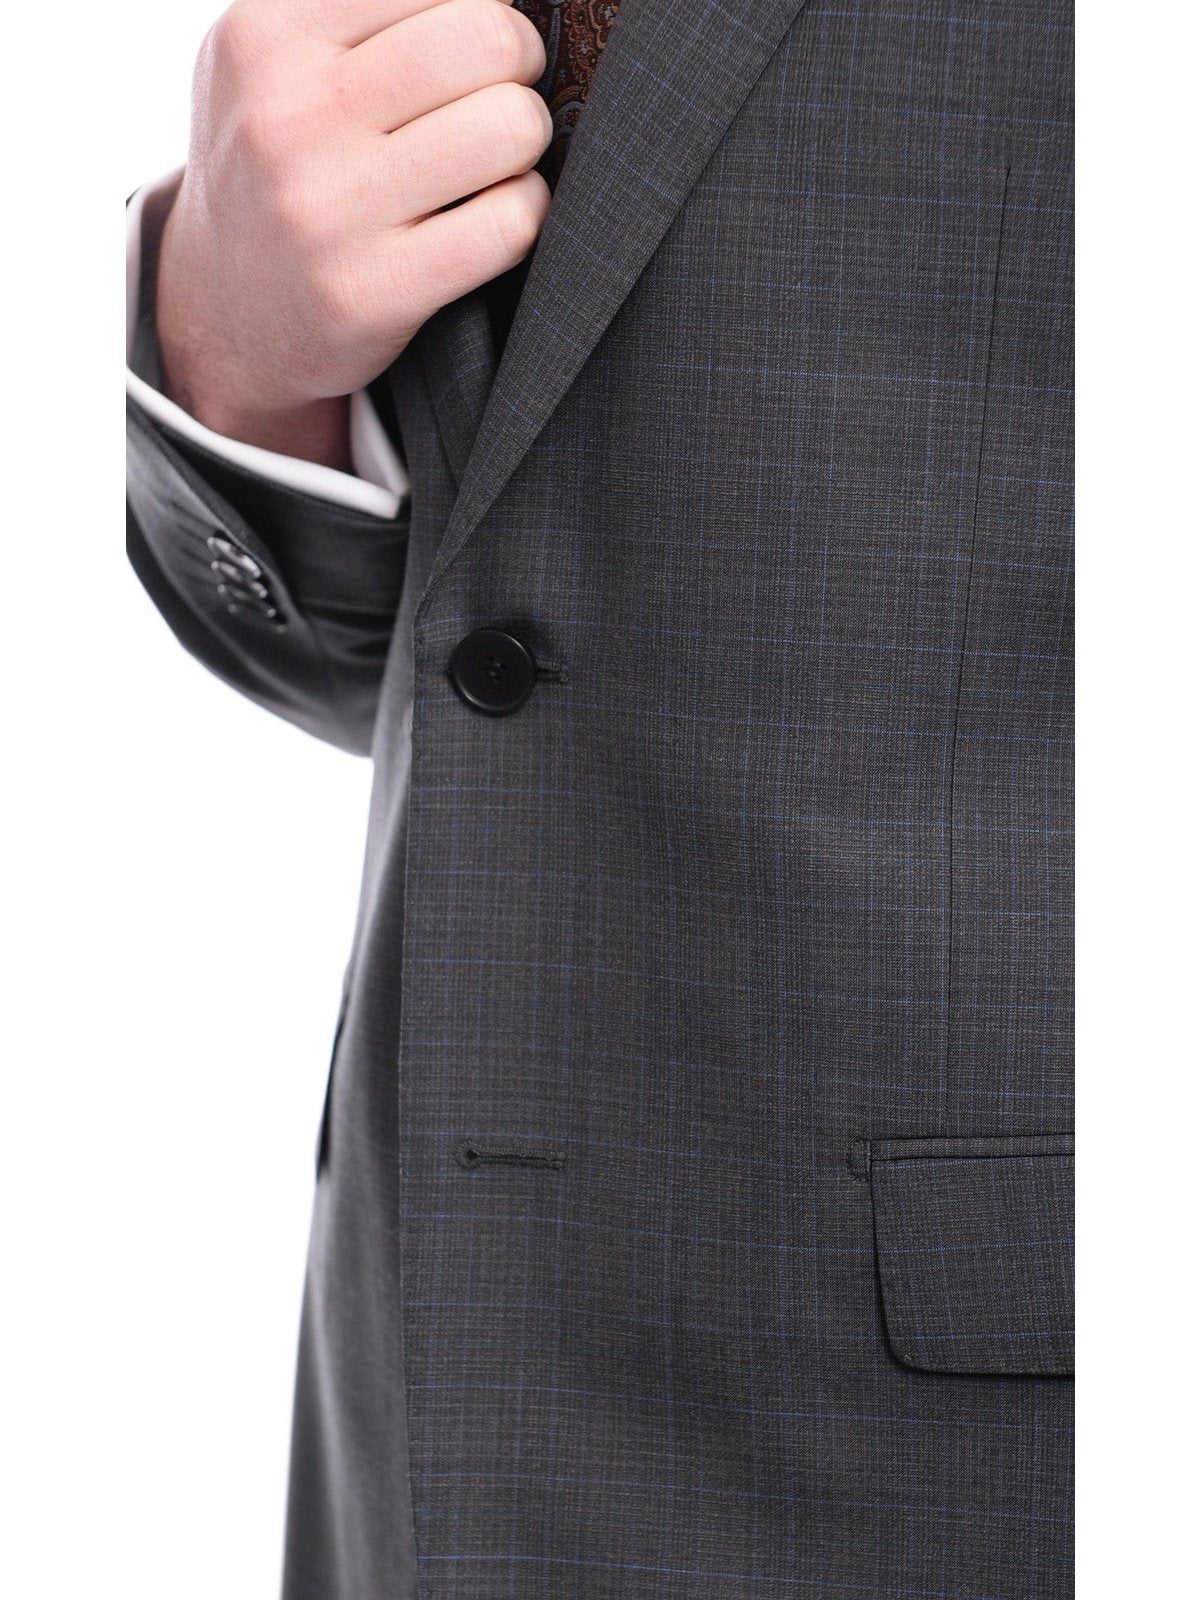 Napoli TWO PIECE SUITS Napoli Slim Fit Medium Gray & Blue Plaid Two Button Half Canvassed Wool Suit